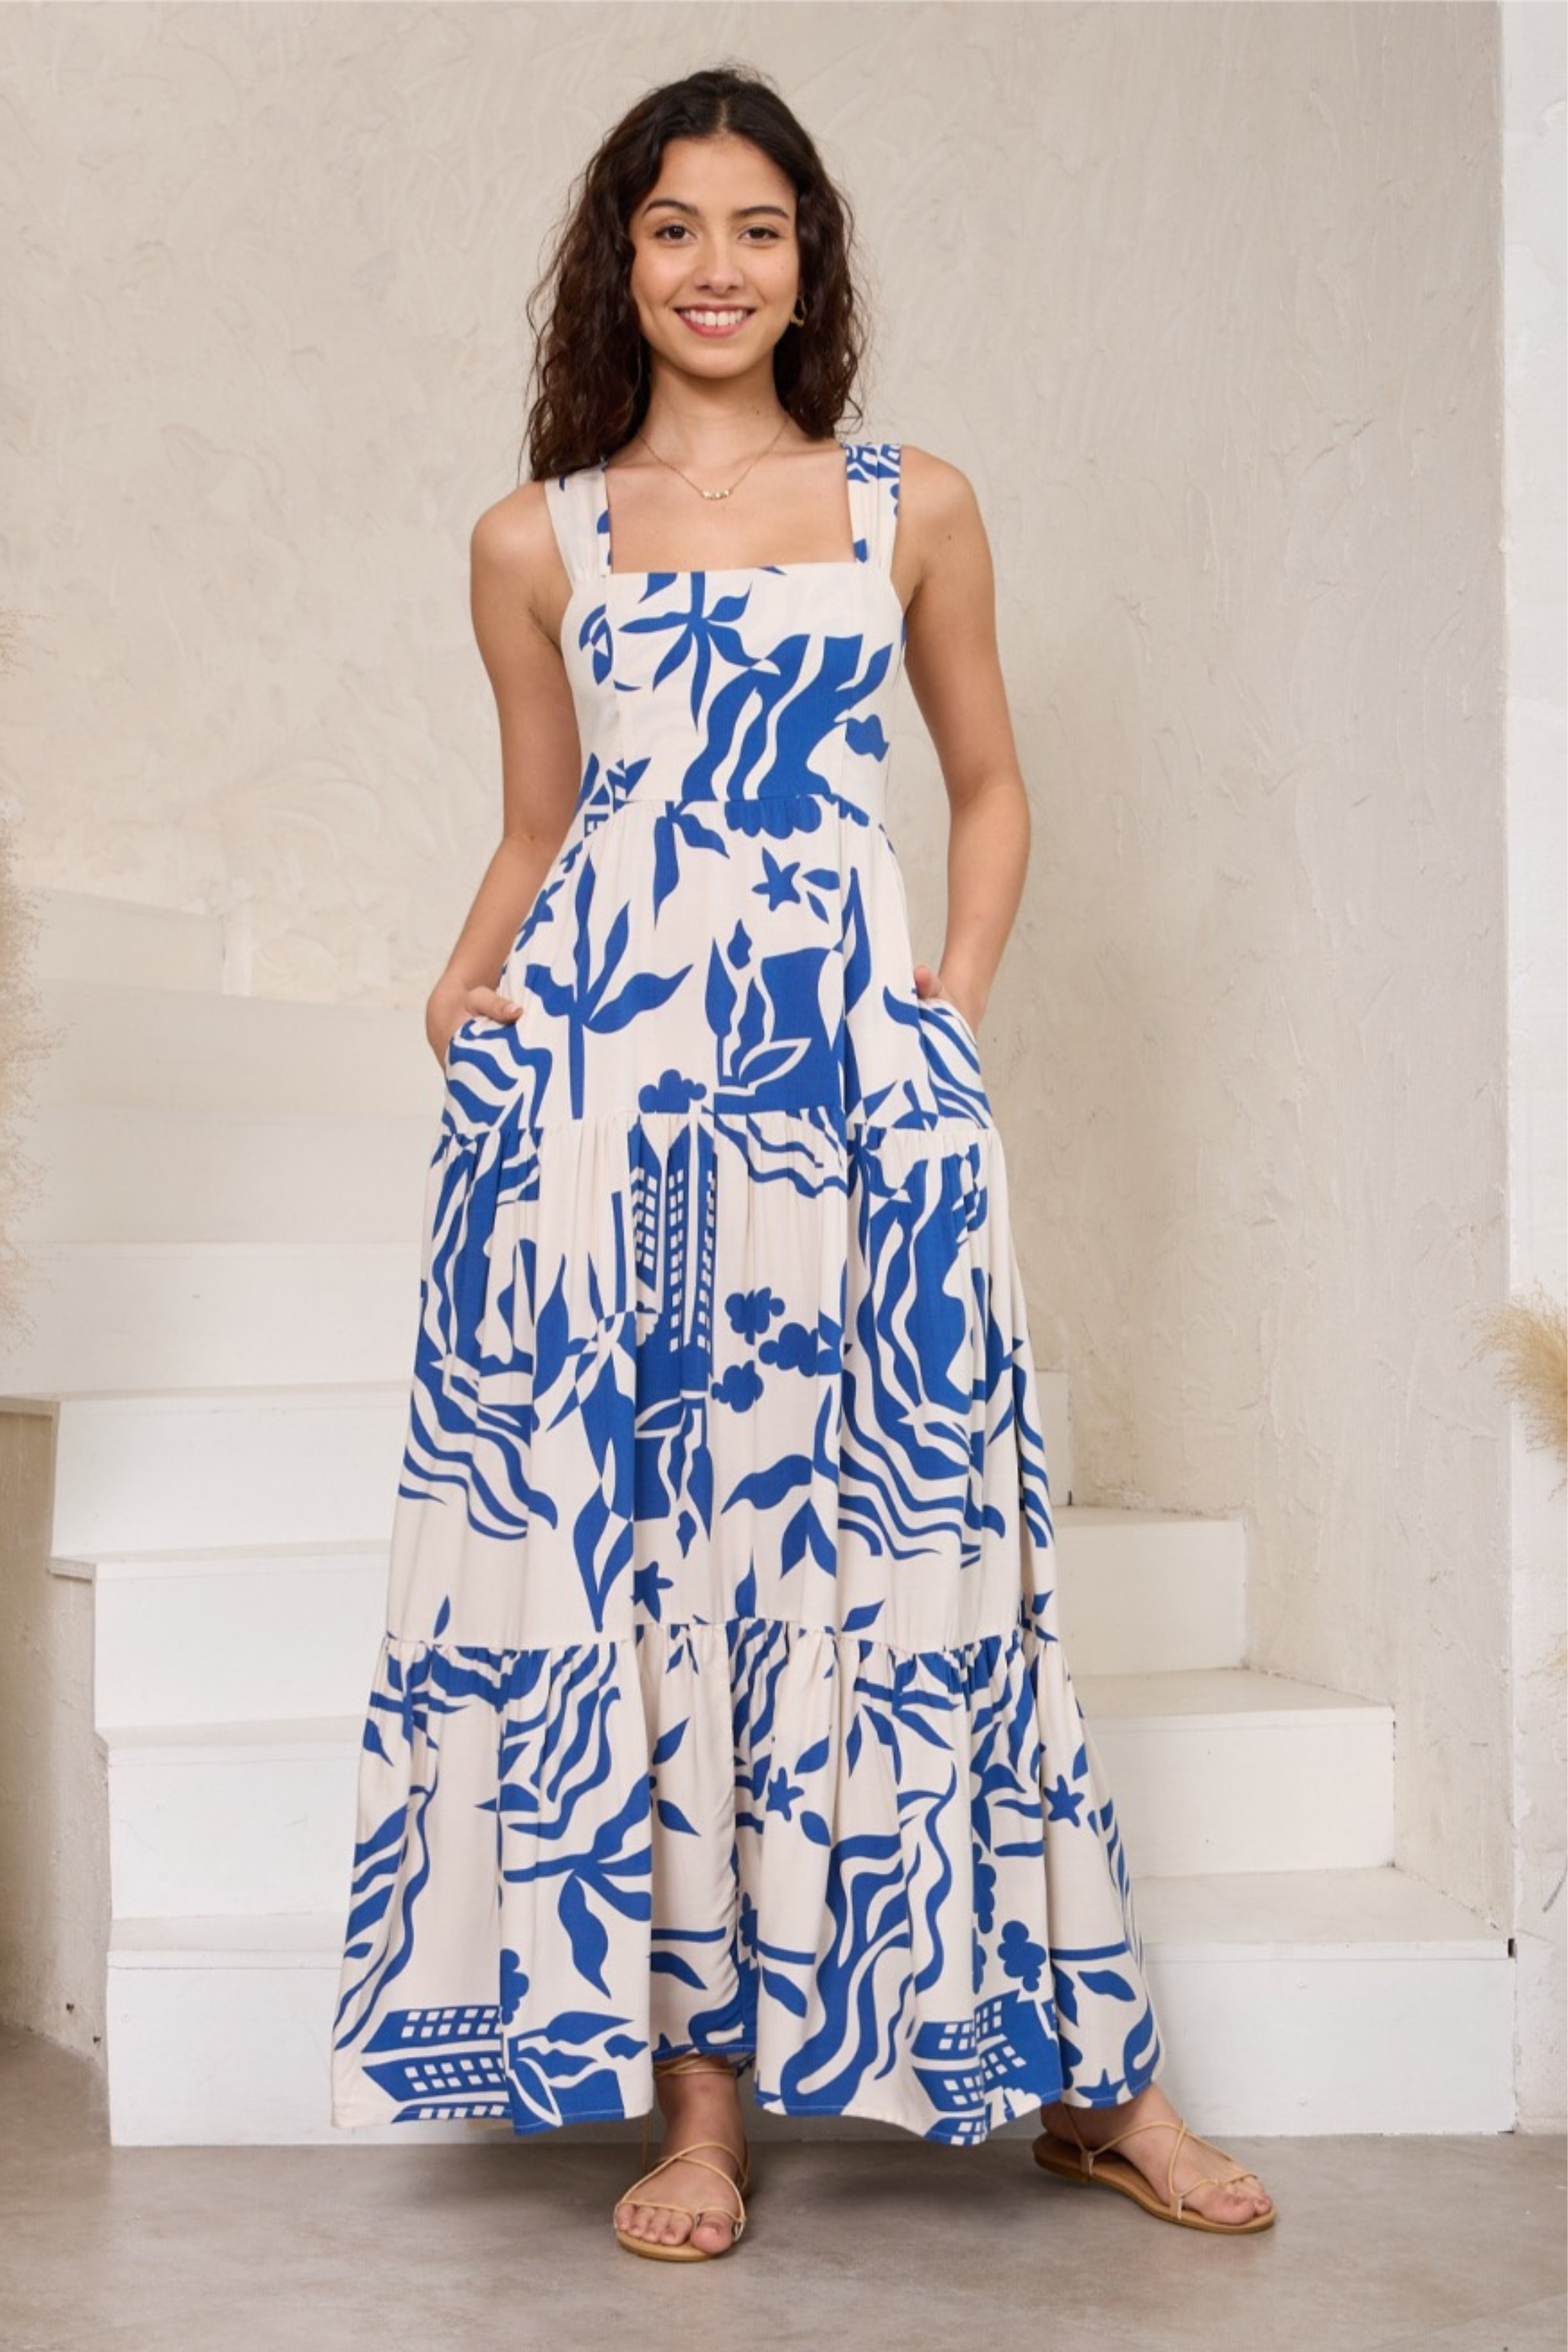 LILY Maxi Dress in Blue and Cream